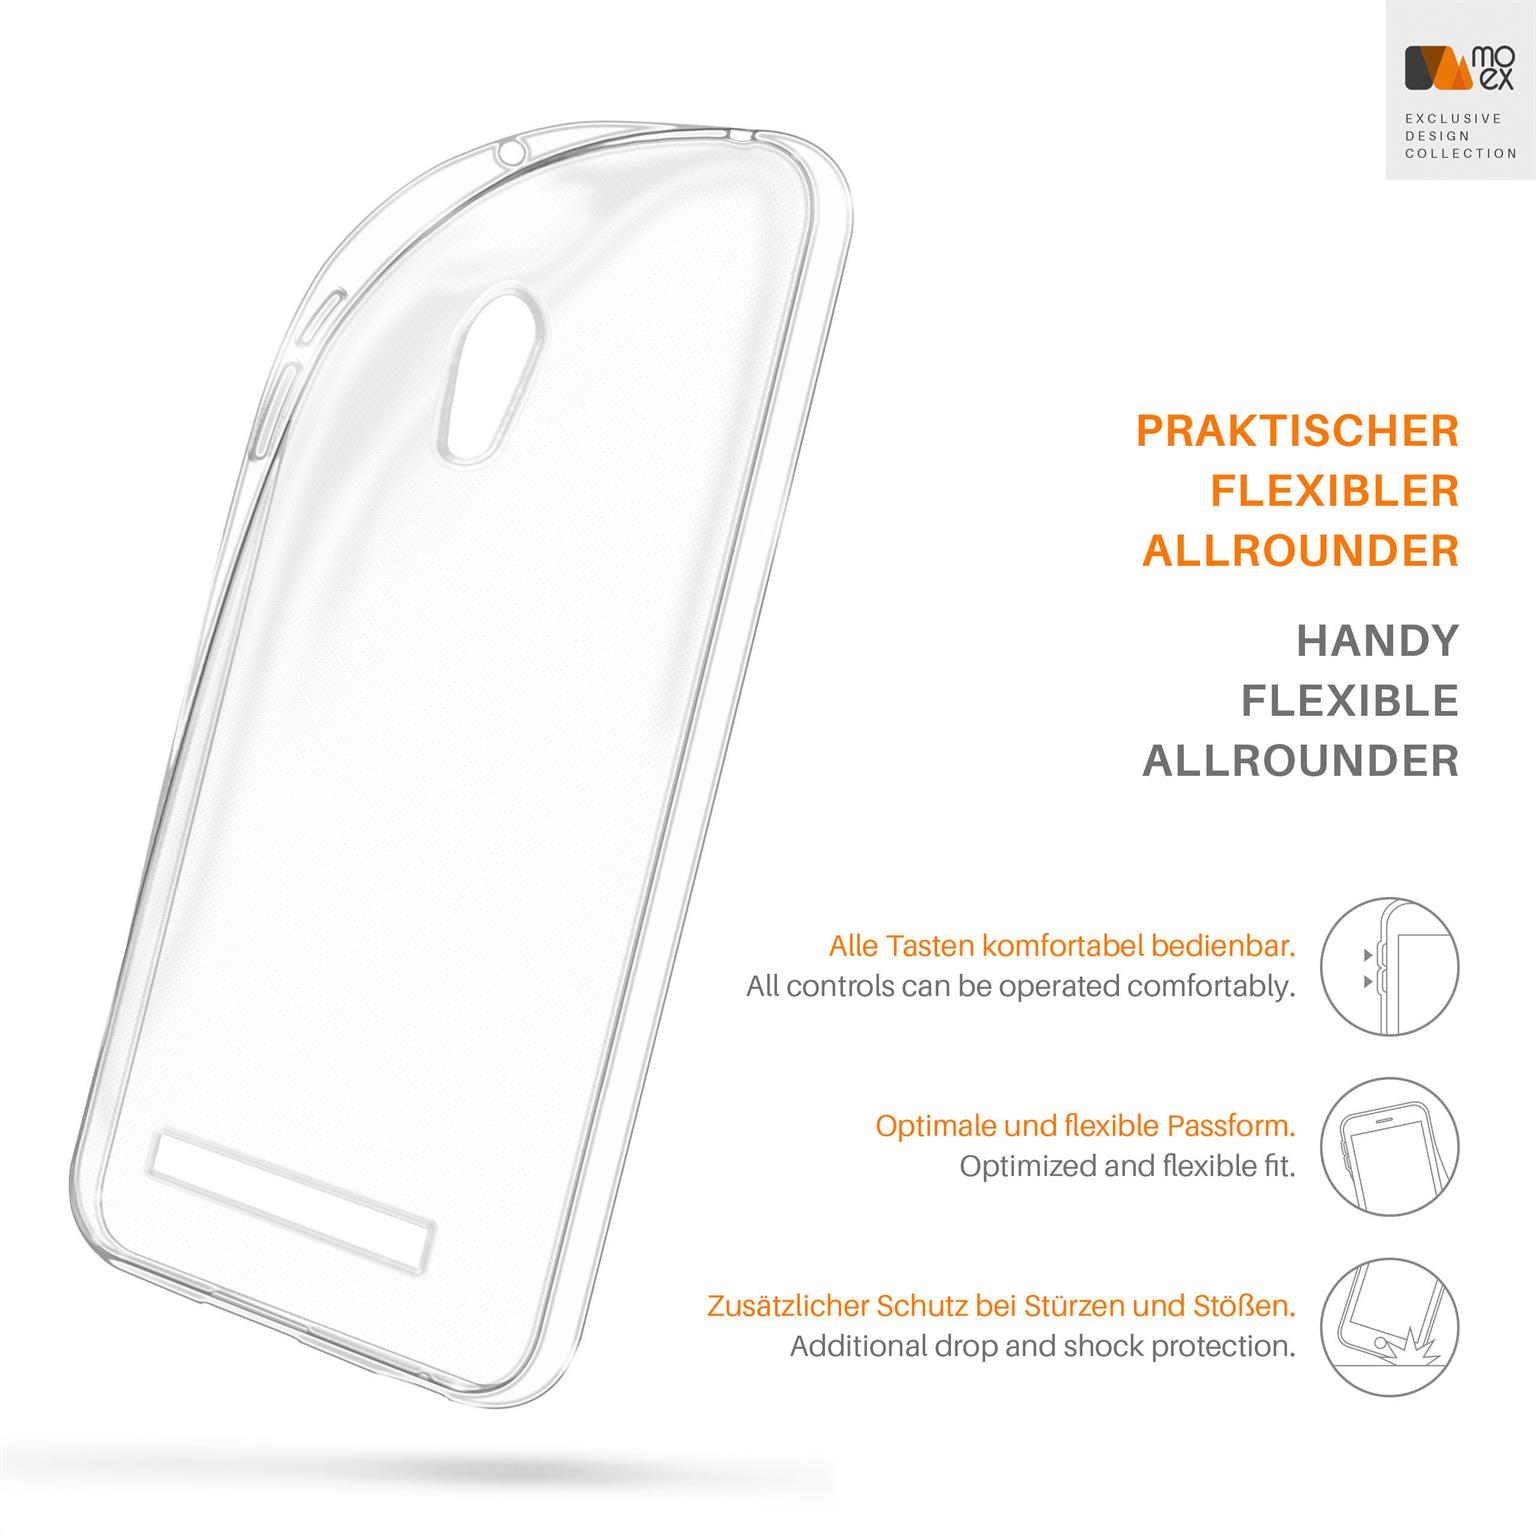 Crystal-Clear Zenfone Aero Backcover, (2014), ASUS, Asus Case, 5 MOEX